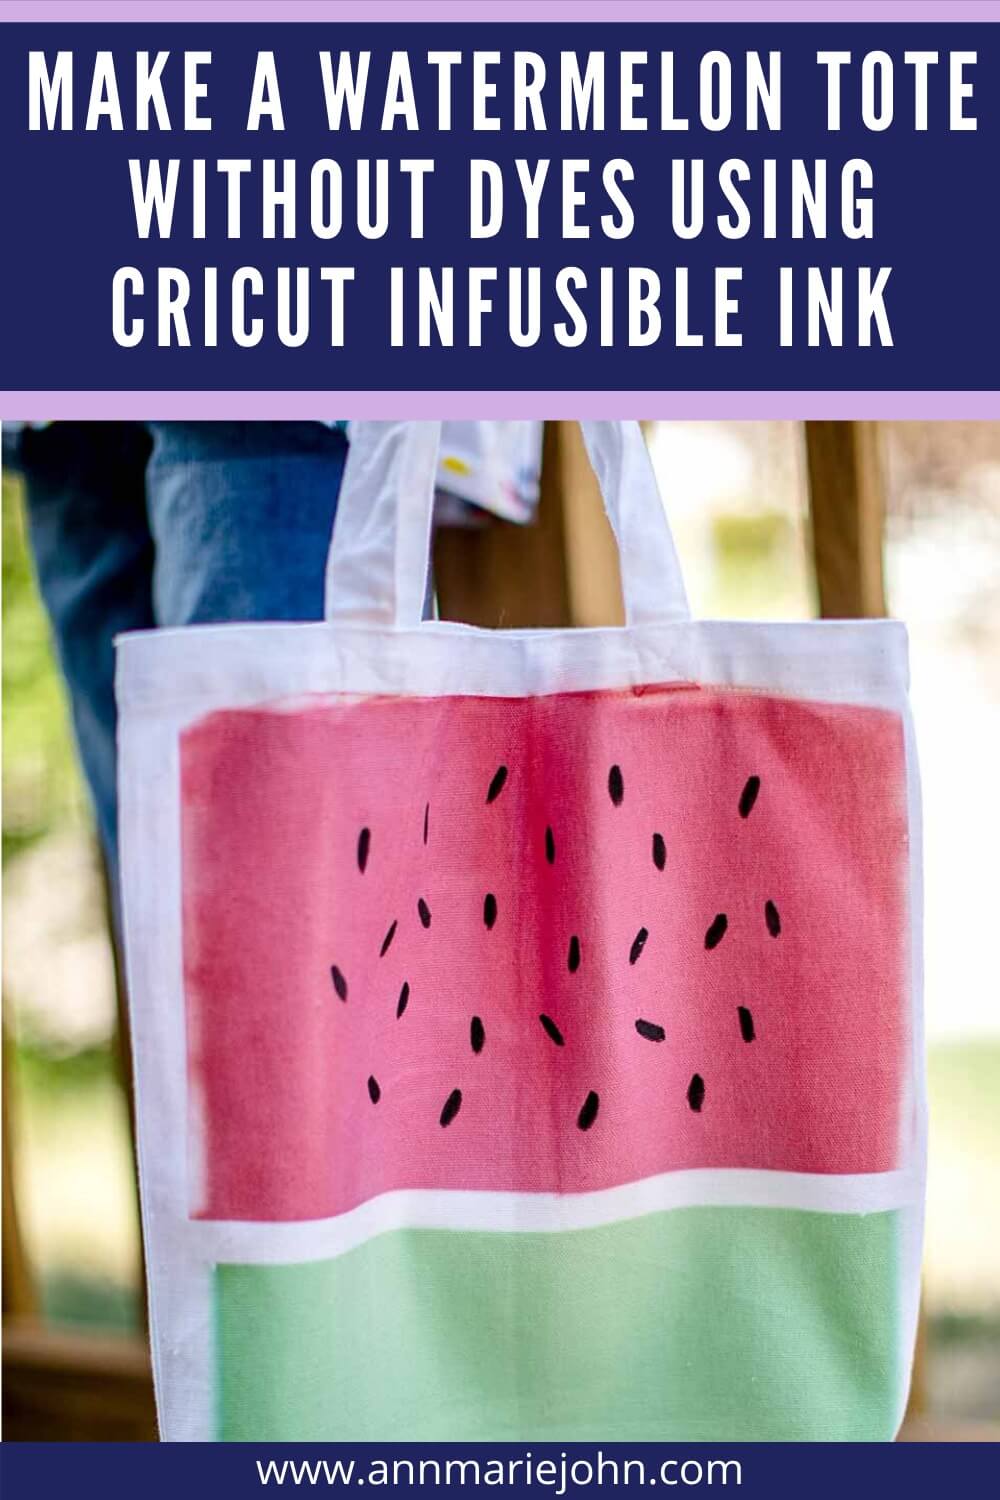 Make a Watermelon Tote without Dyes Using Cricut Infusible Ink